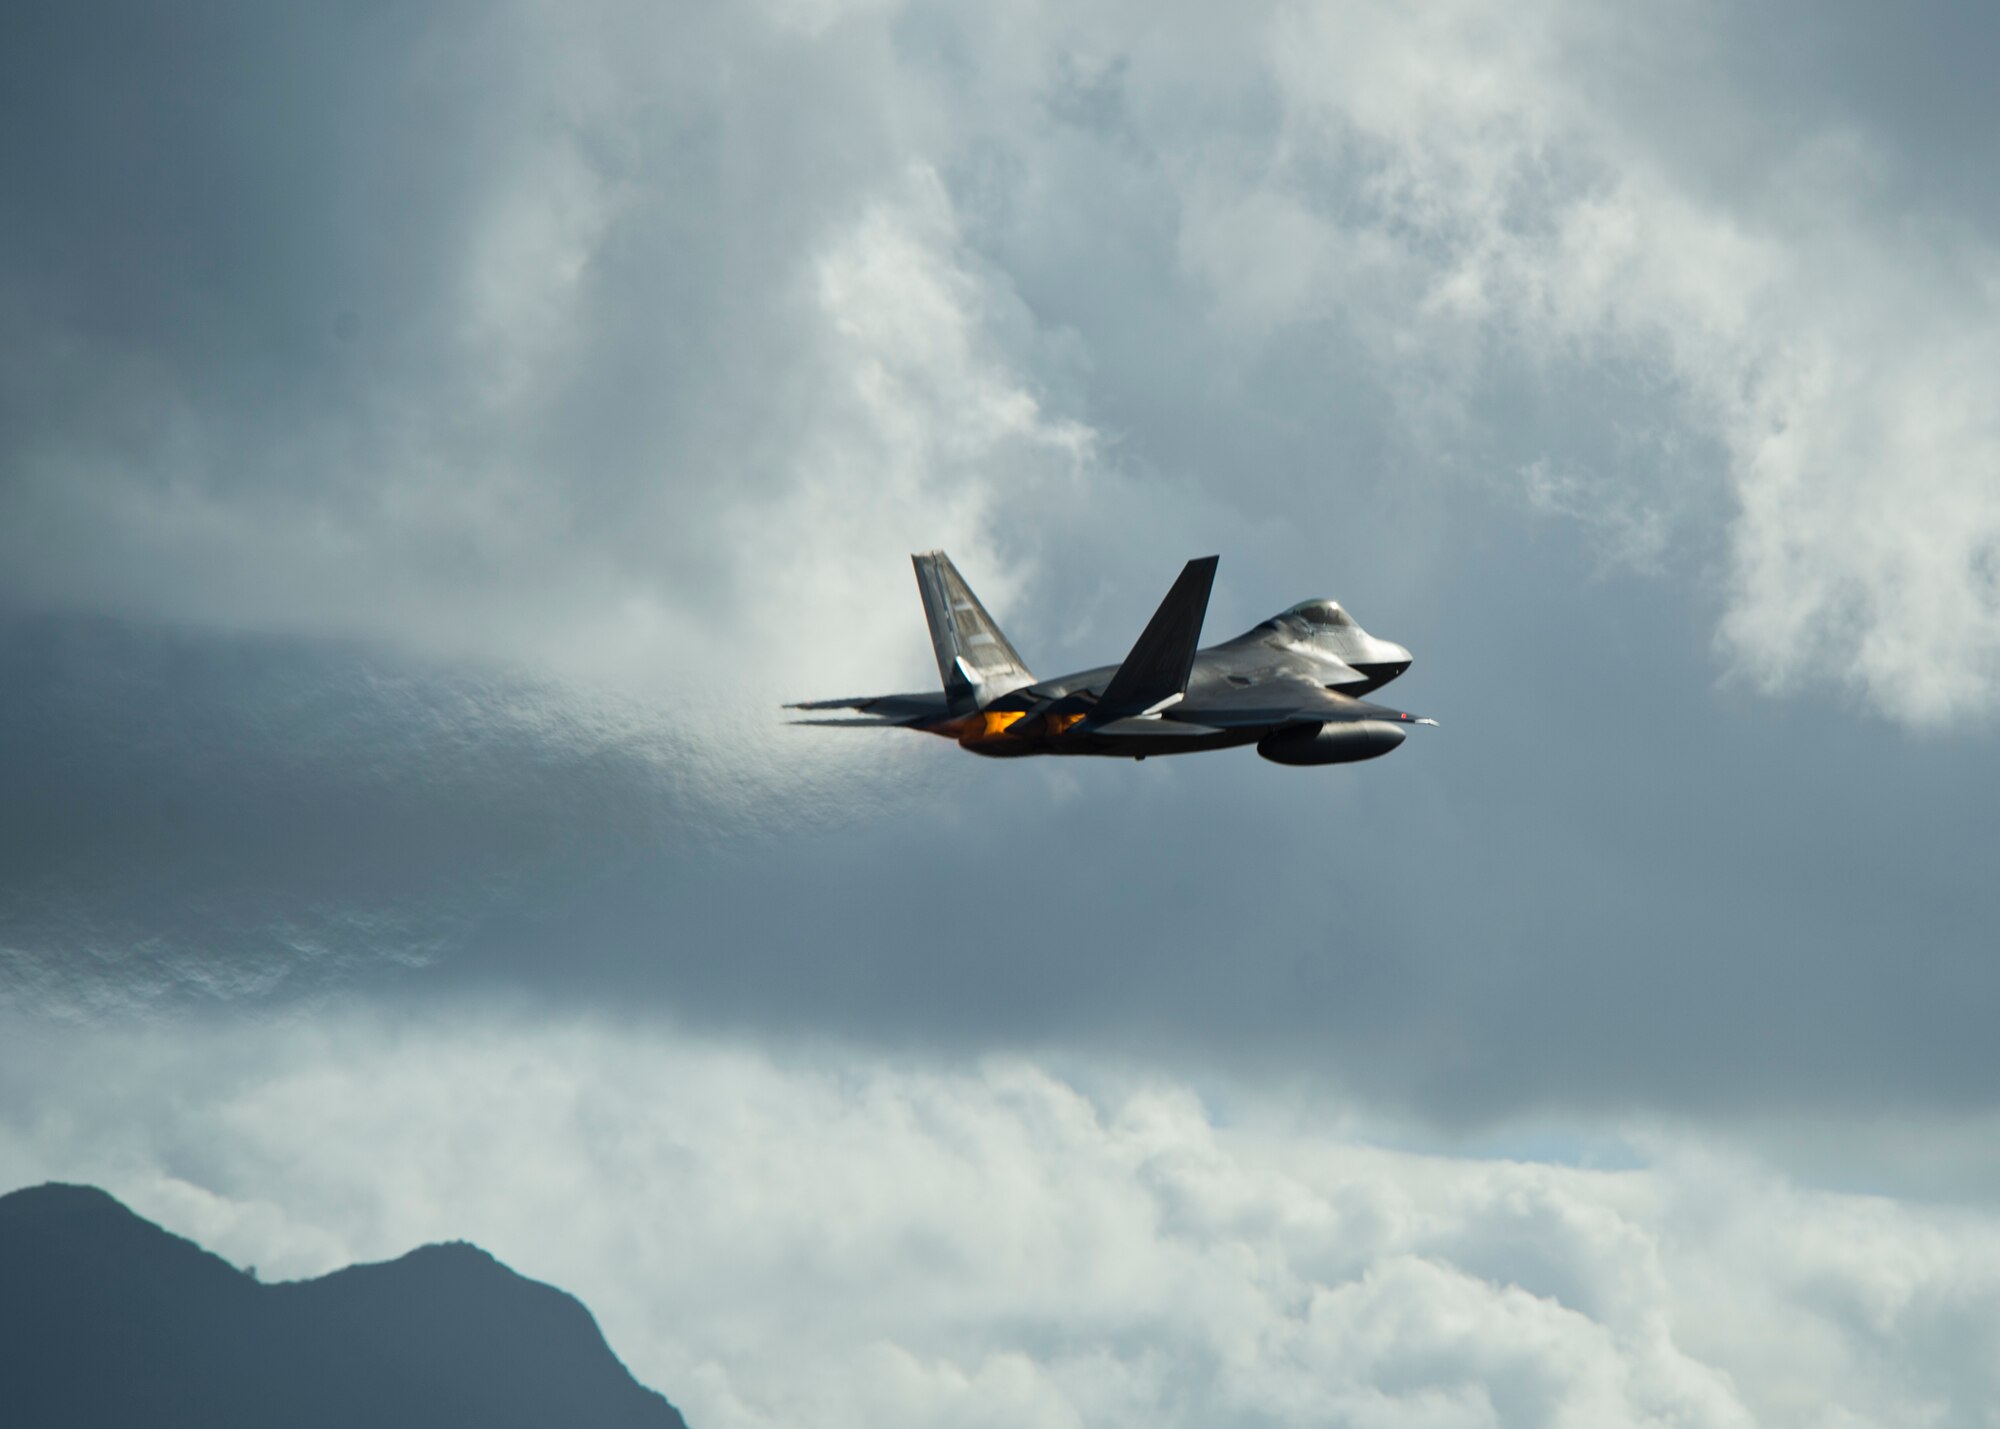 A United States Air Force F-22 Raptor, from the Hawaiian Raptors, takes off from Joint Base Pearl Harbor-Hickam, Hawaii, April 20, 2015. The F-22 engines produce more thrust than any current fighter engine. The combination of sleek aerodynamic design and increased thrust allows the F-22 to cruise at supersonic airspeeds (greater than 1.5 Mach) without using afterburner -- a characteristic known as supercruise. Supercruise greatly expands the F-22 's operating envelope in both speed and range over current fighters, which must use fuel-consuming afterburner to operate at supersonic speeds.  (U.S. Air Force photo by Tech. Sgt. Aaron Oelrich/Released)    